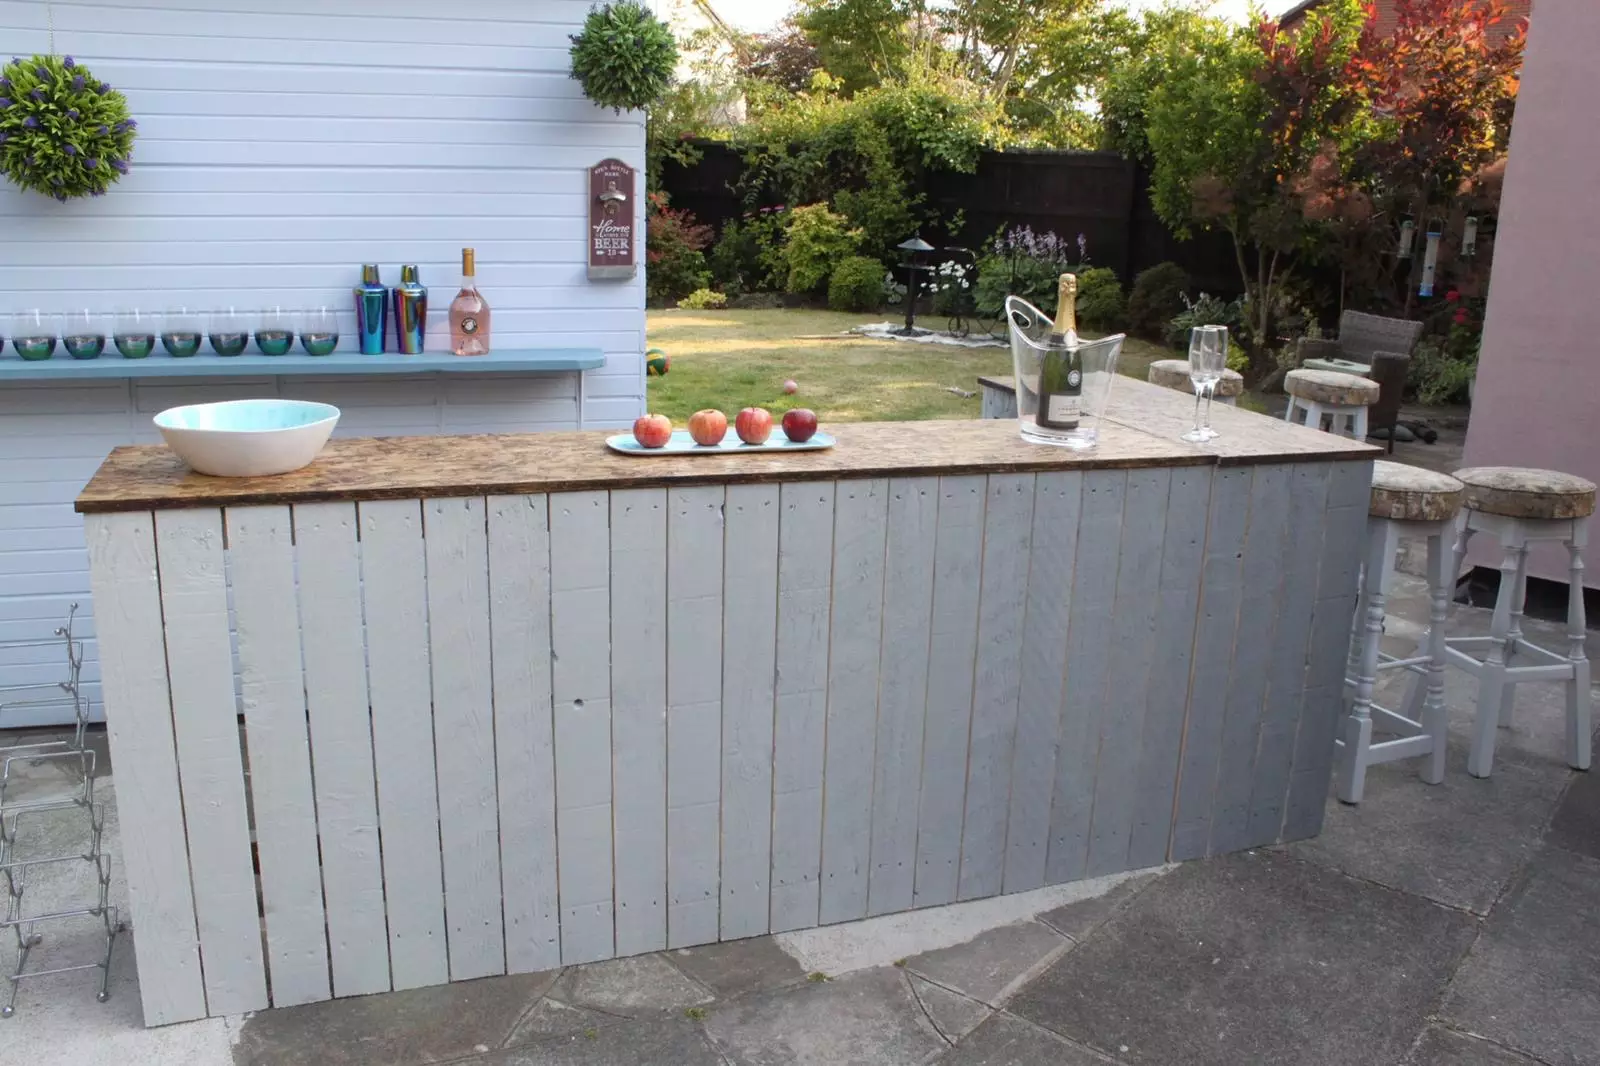 Craig created an incredible outdoor bar himself, using pallets and reused wood (